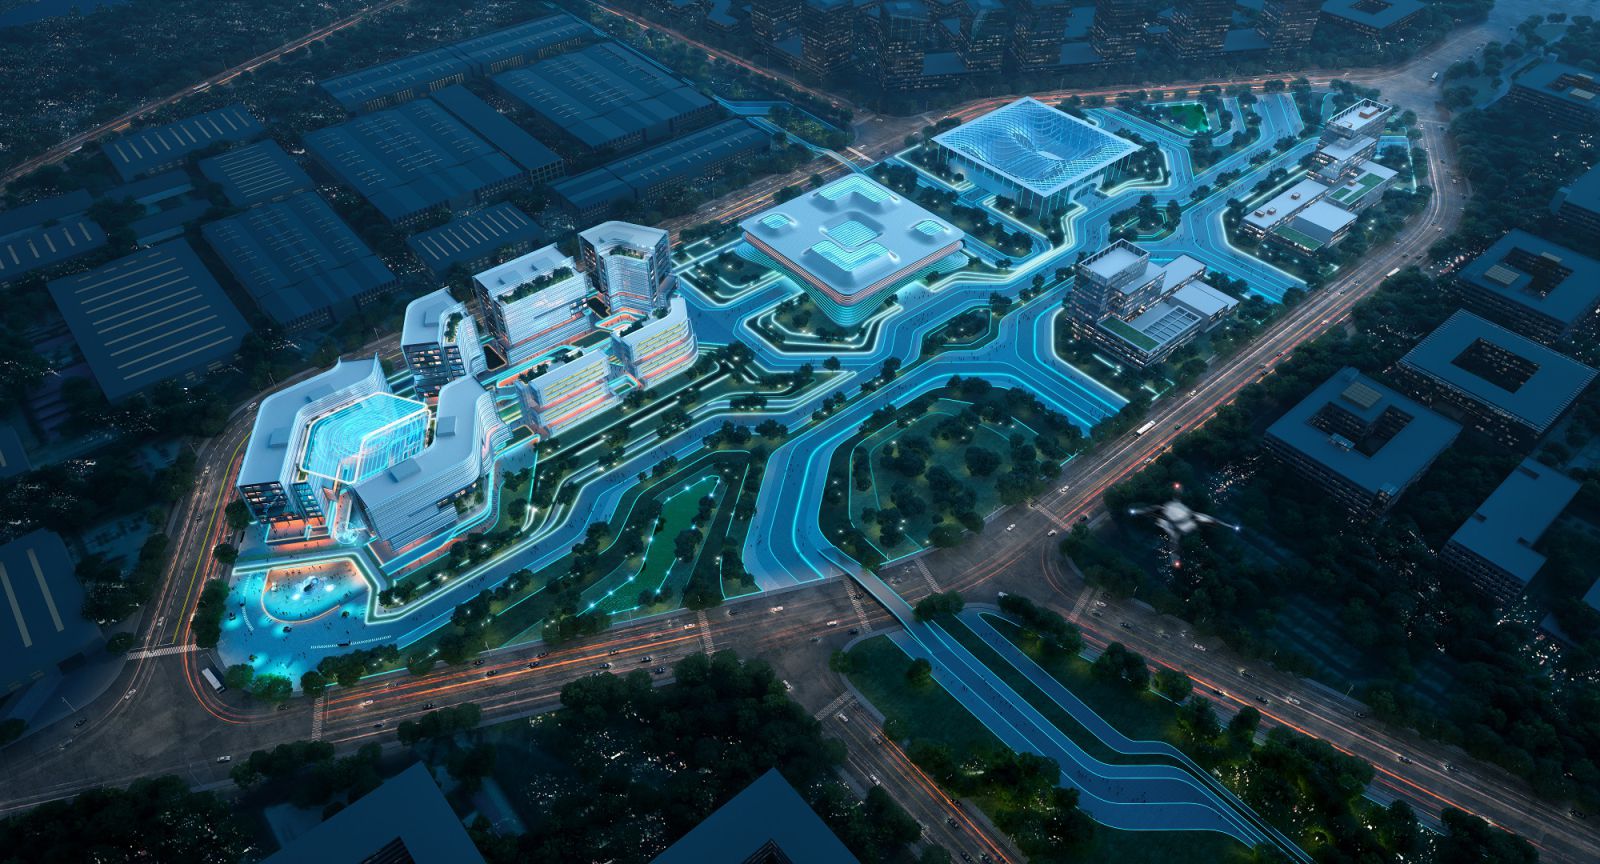 Wuhan National Cybersecurity Center